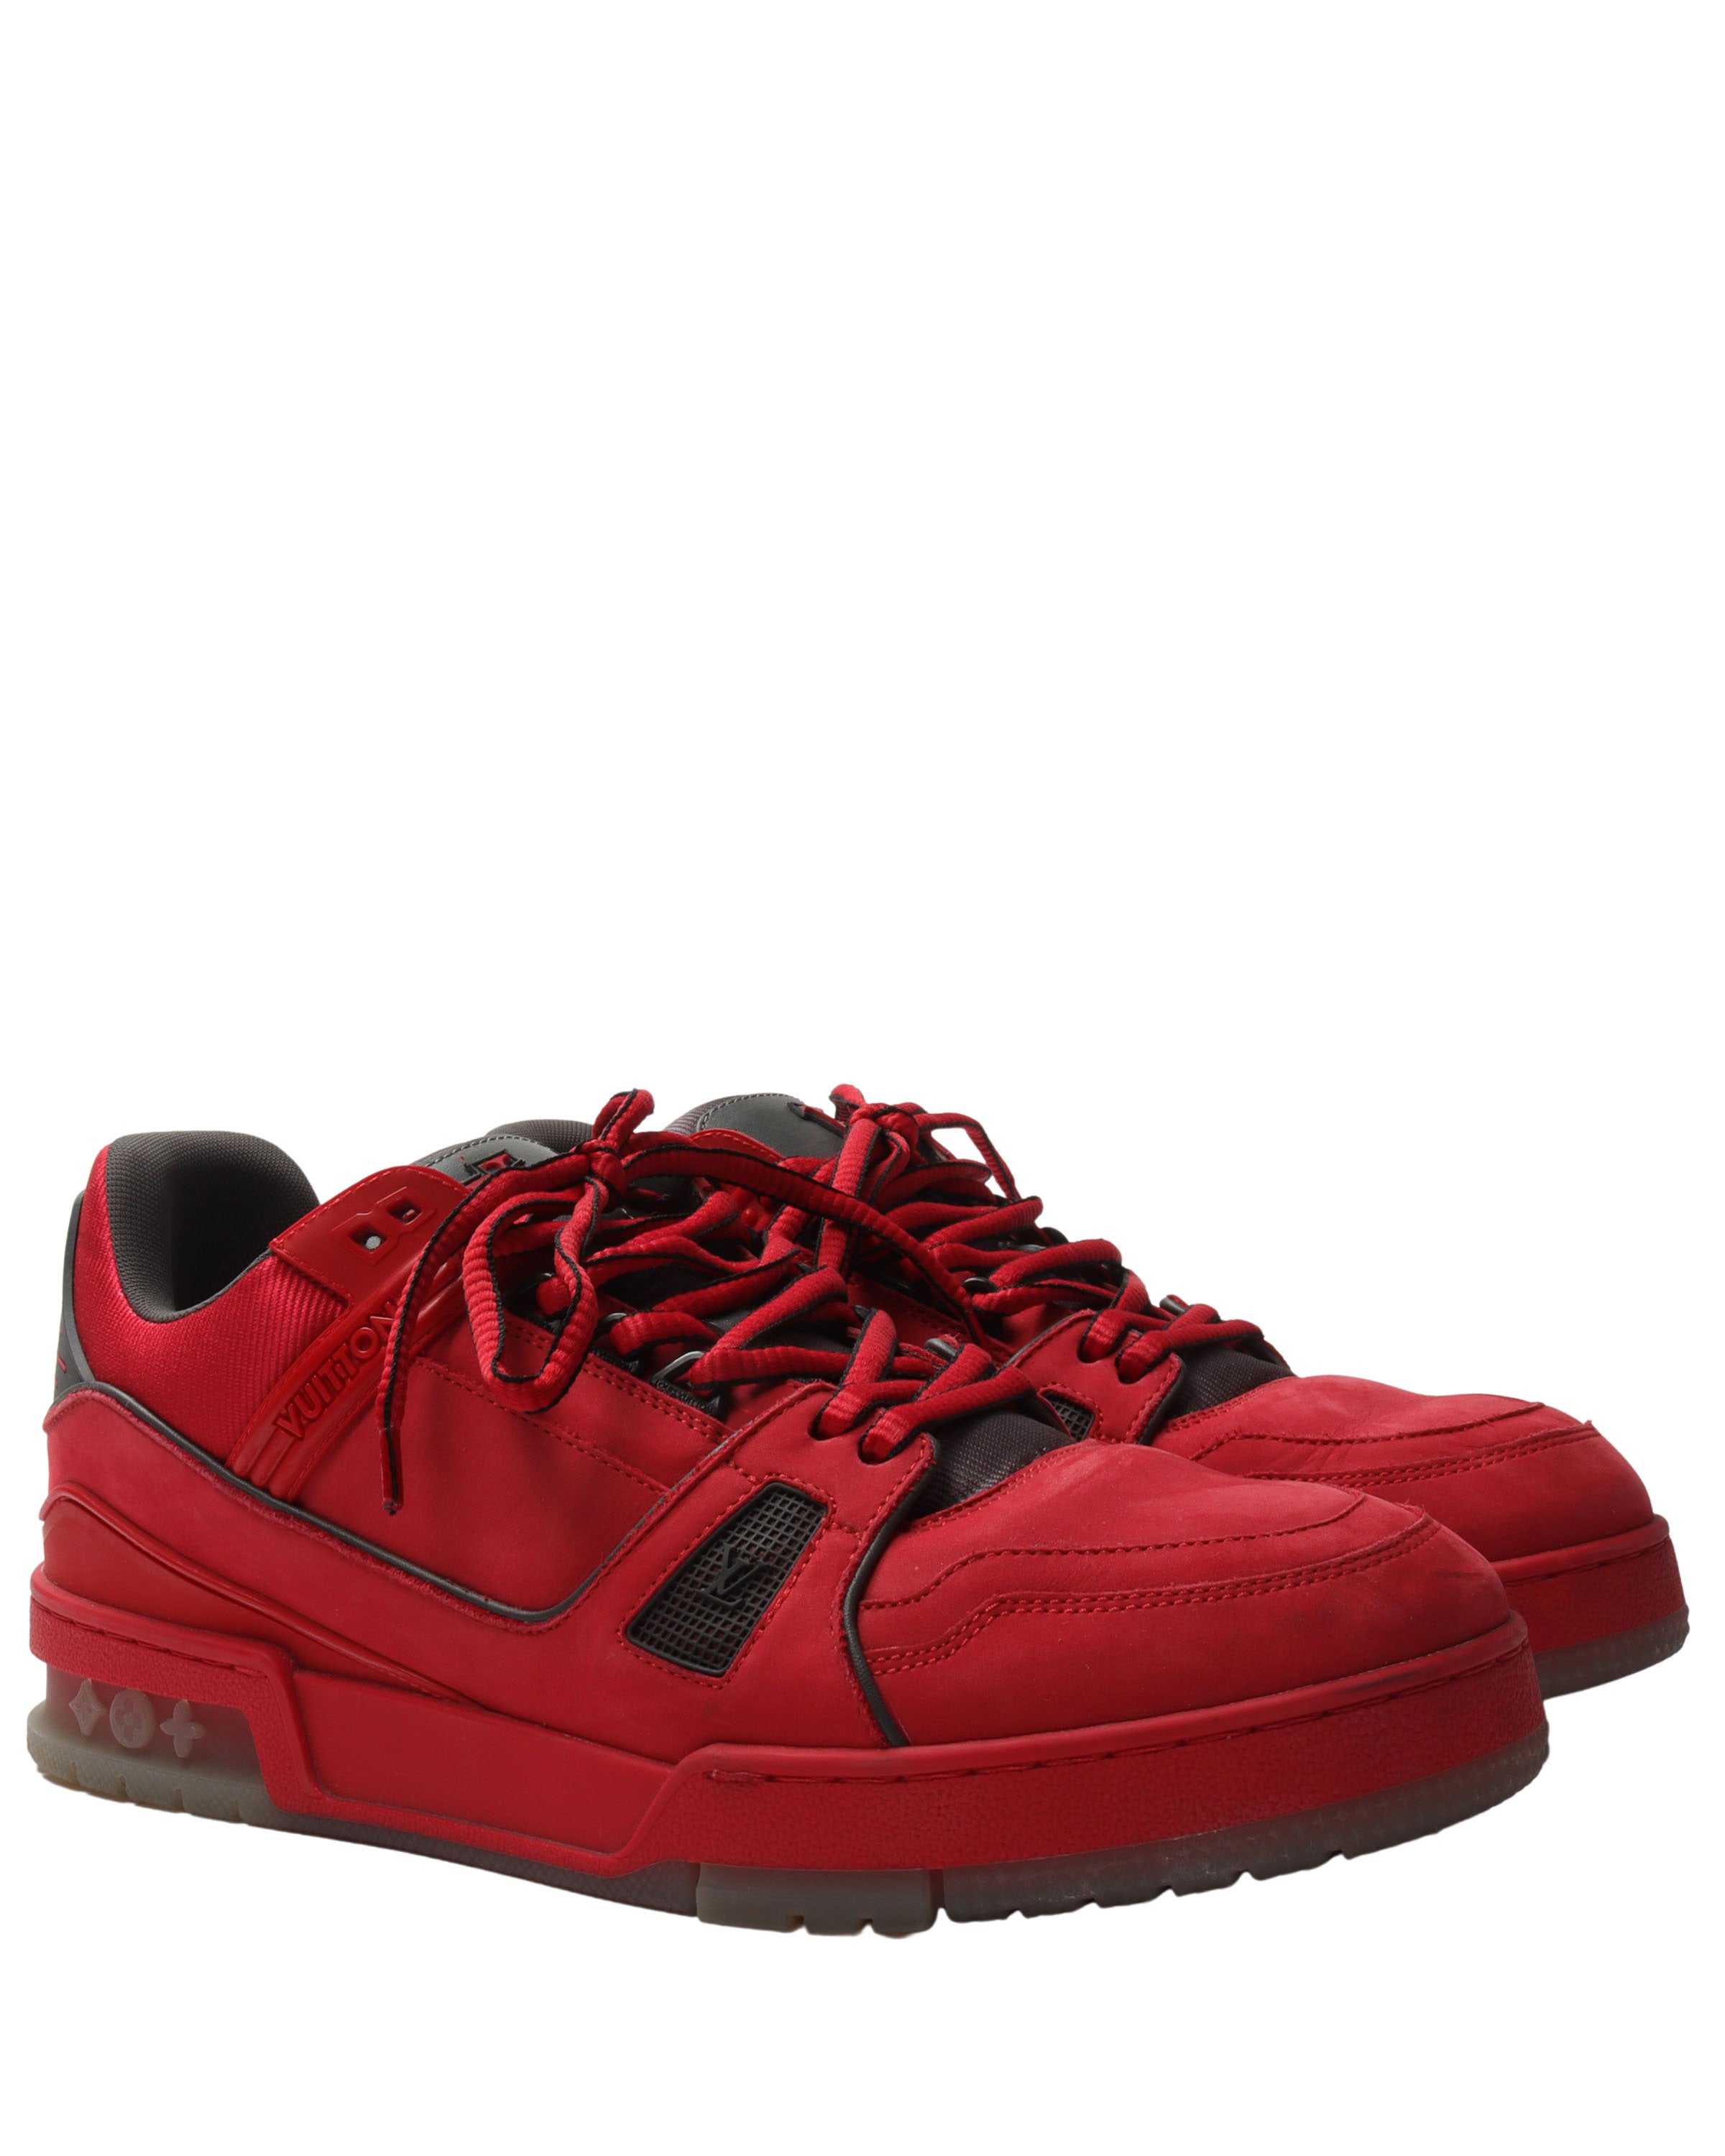 Louis Vuitton Red Strap Trainers, Trainers - Designer Exchange